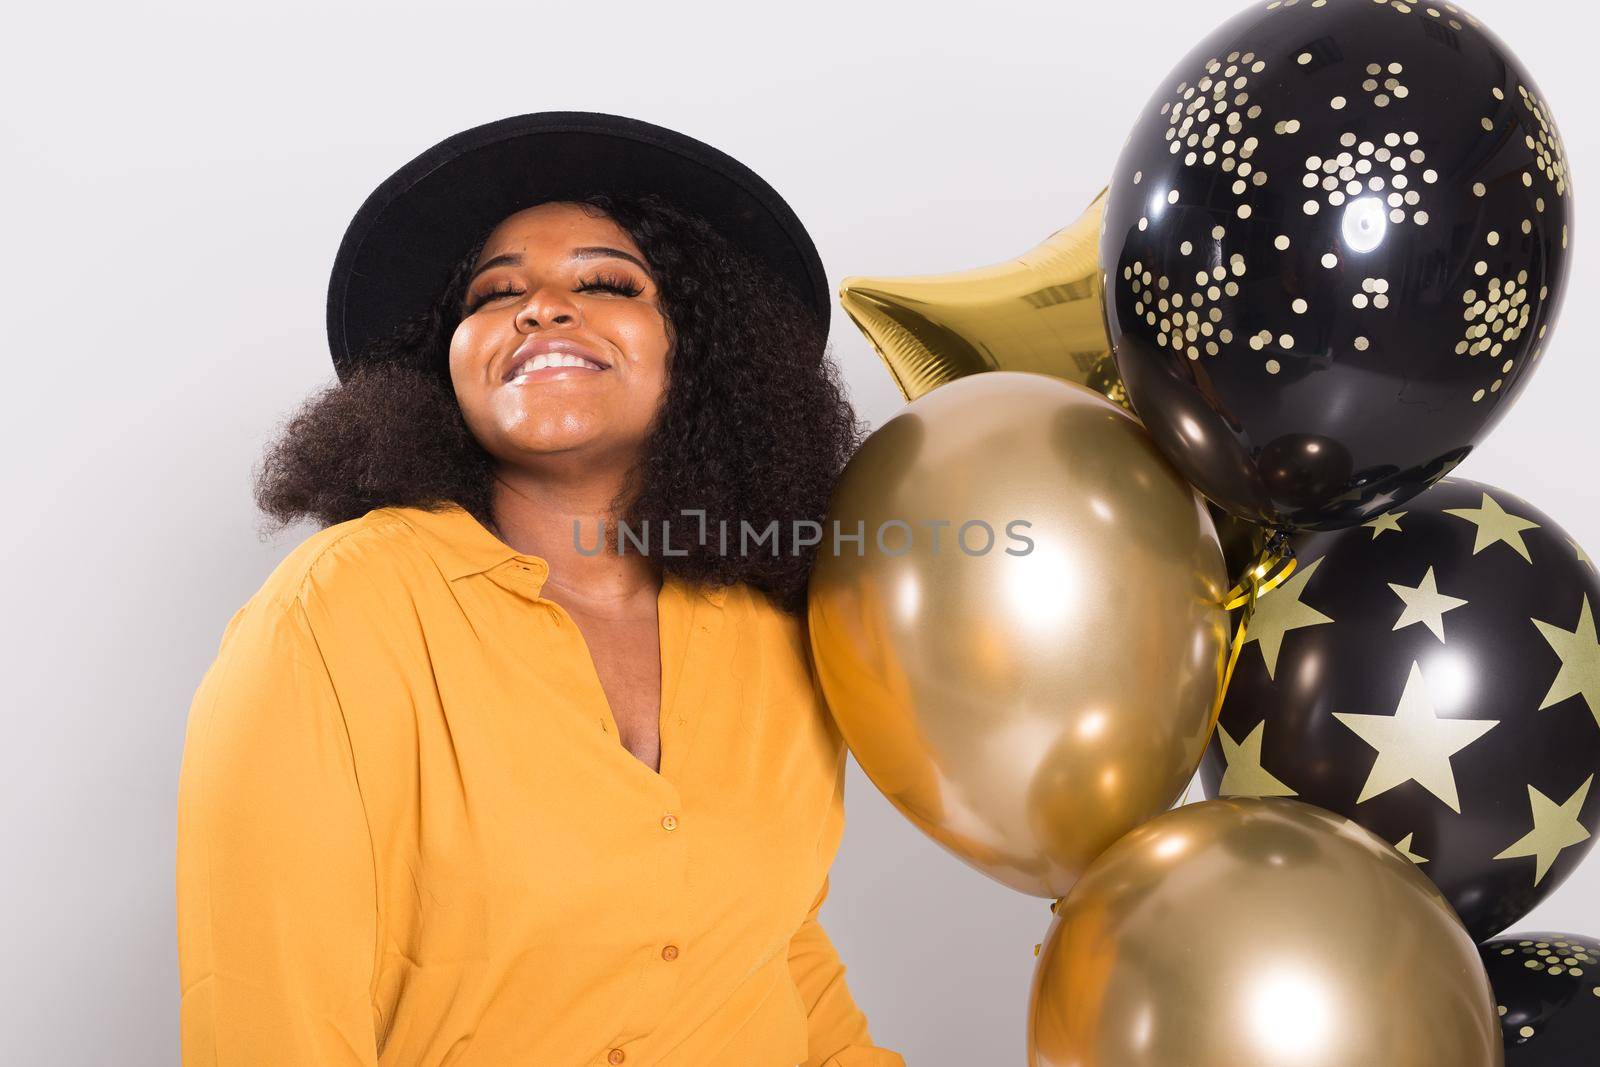 Holidays, birthday party and fun concept - Portrait of smiling young African-American young woman looking stylish on white background holding balloons. by Satura86